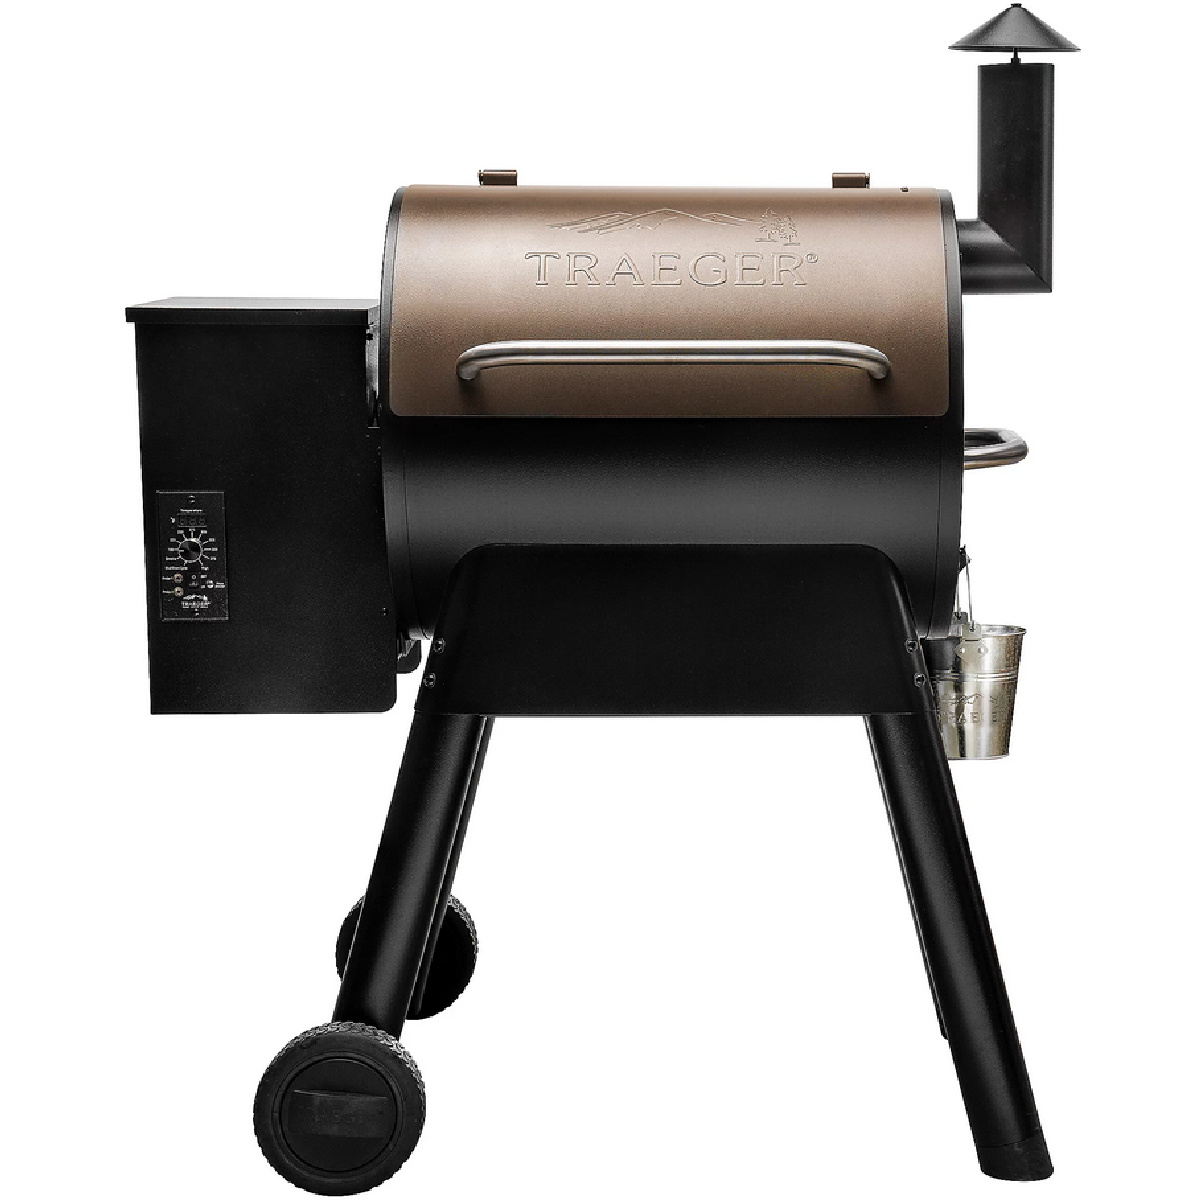 Traeger Pro Series 22 Wood Fired Pellet Grill & Smoker